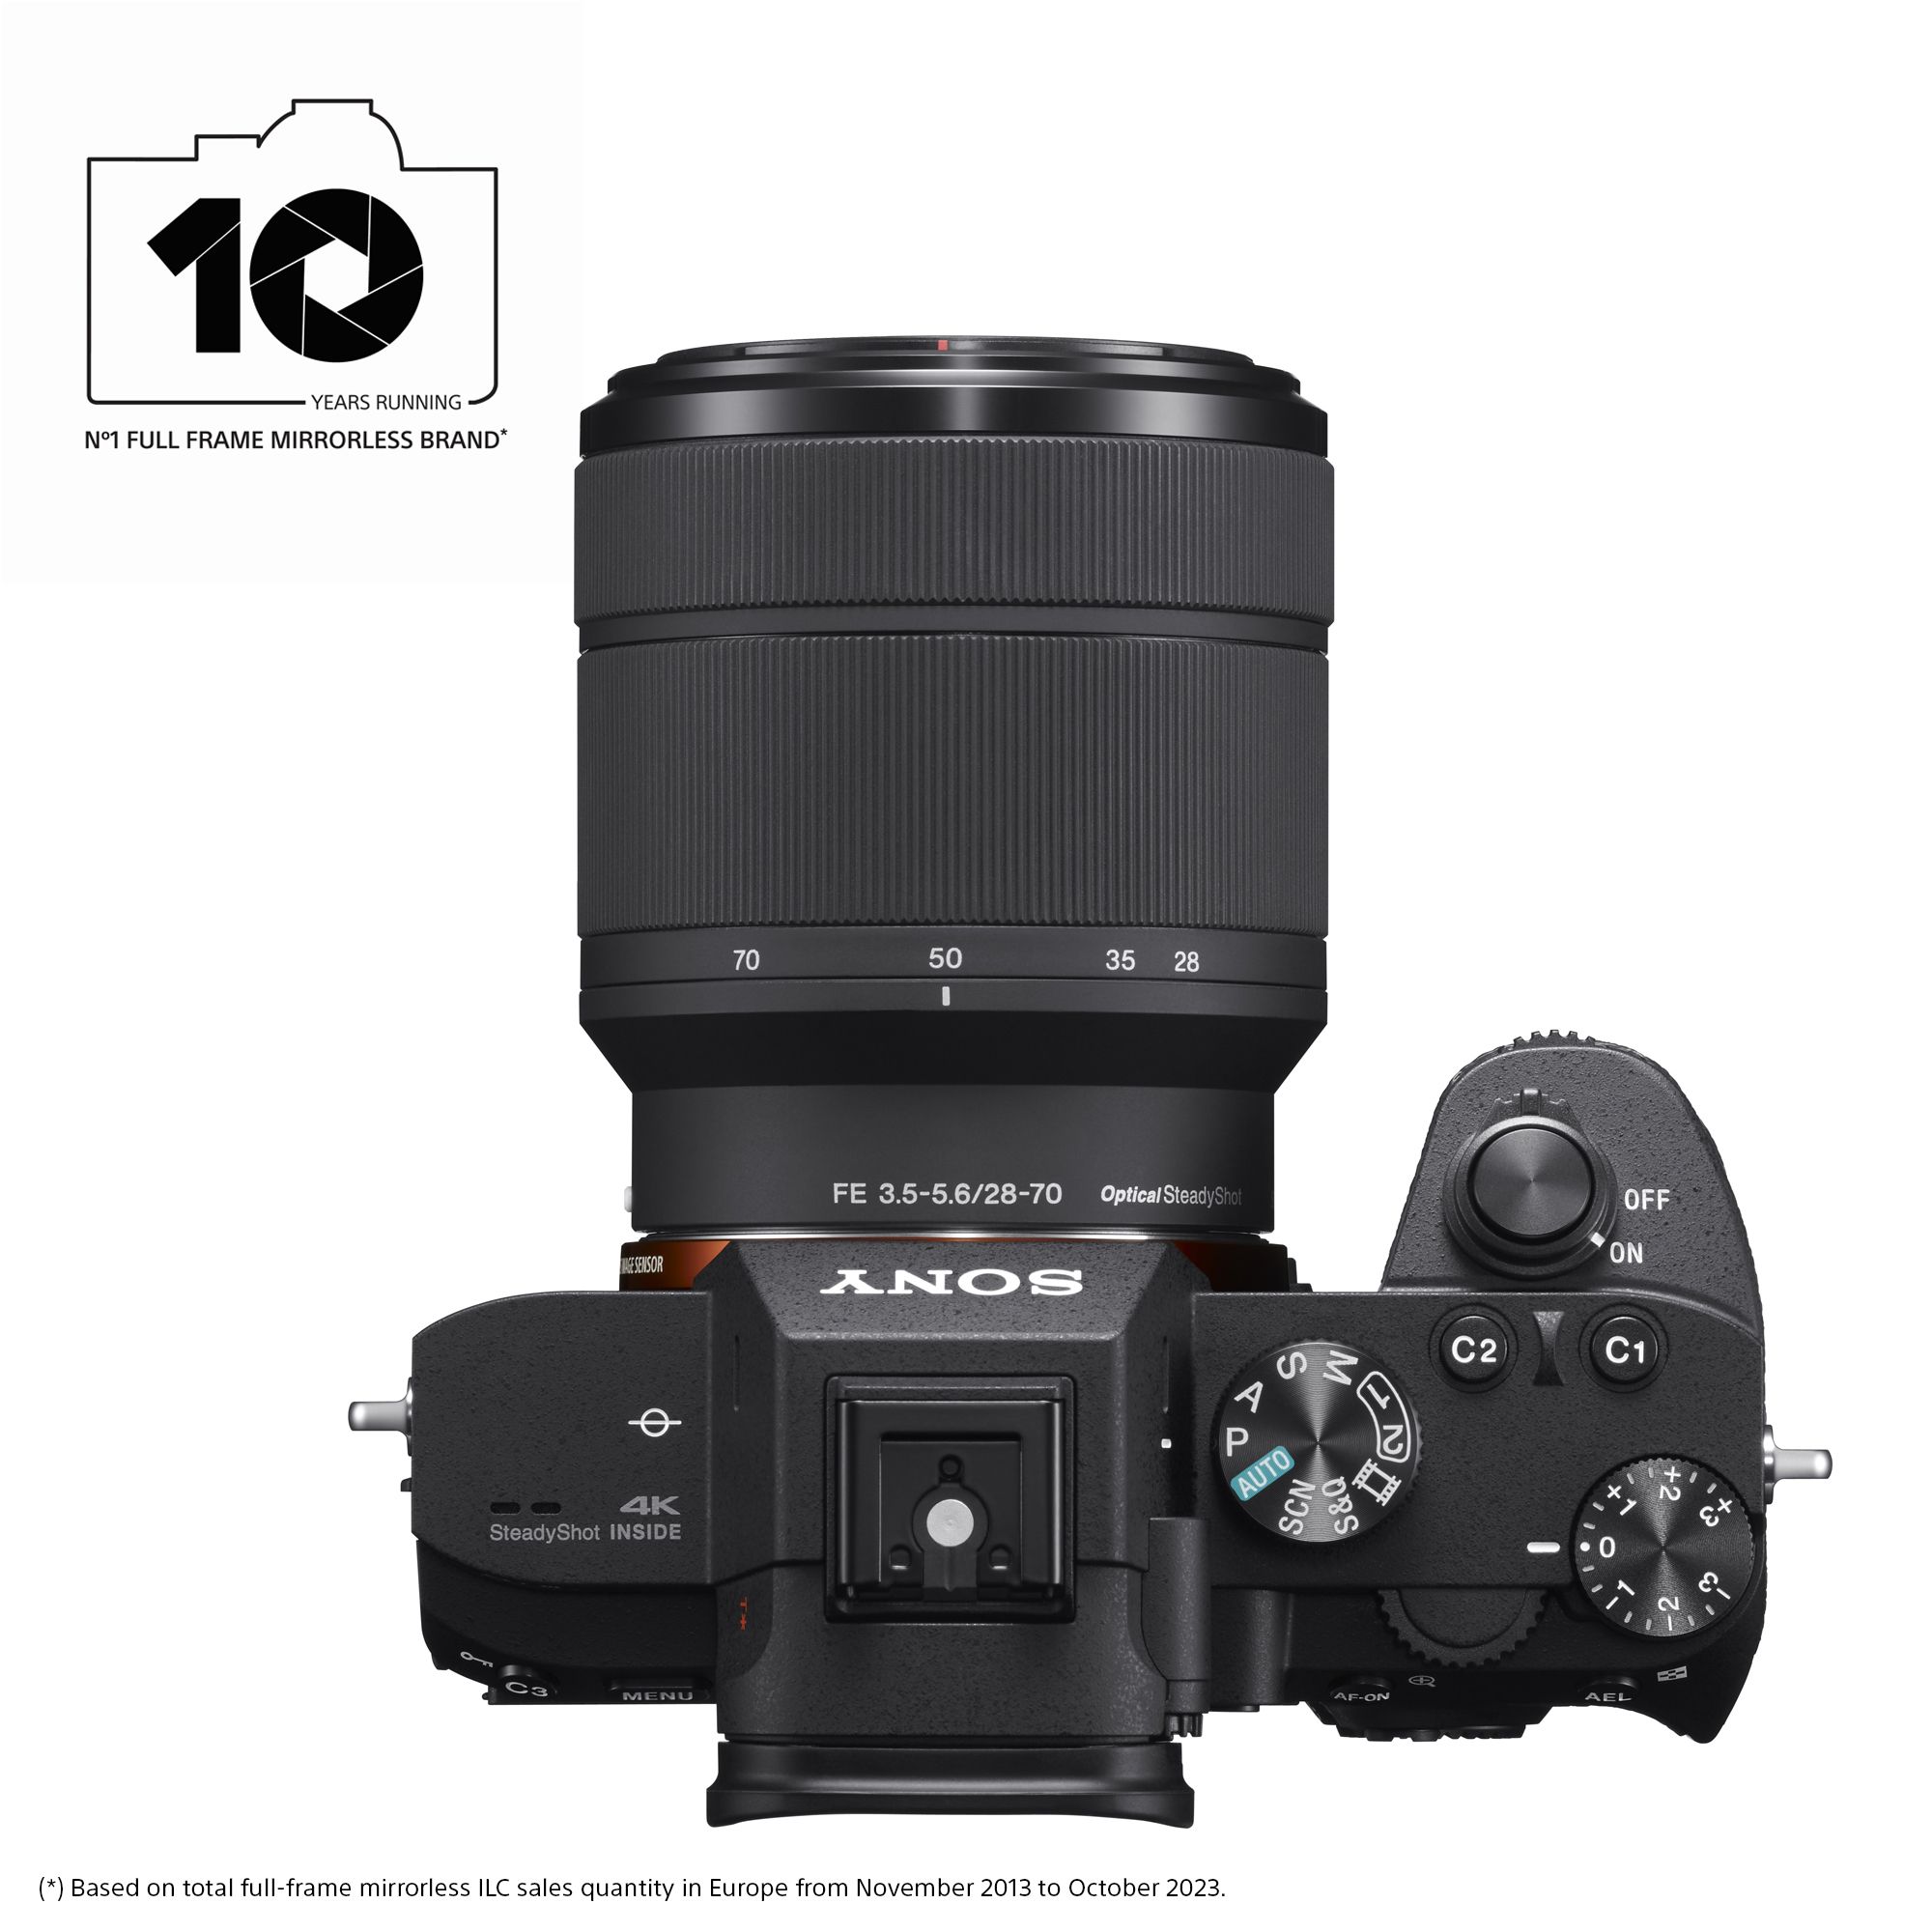 Sony Alpha 7 III with 35 mm Full-Frame Image Sensor (ILCE-7M3)